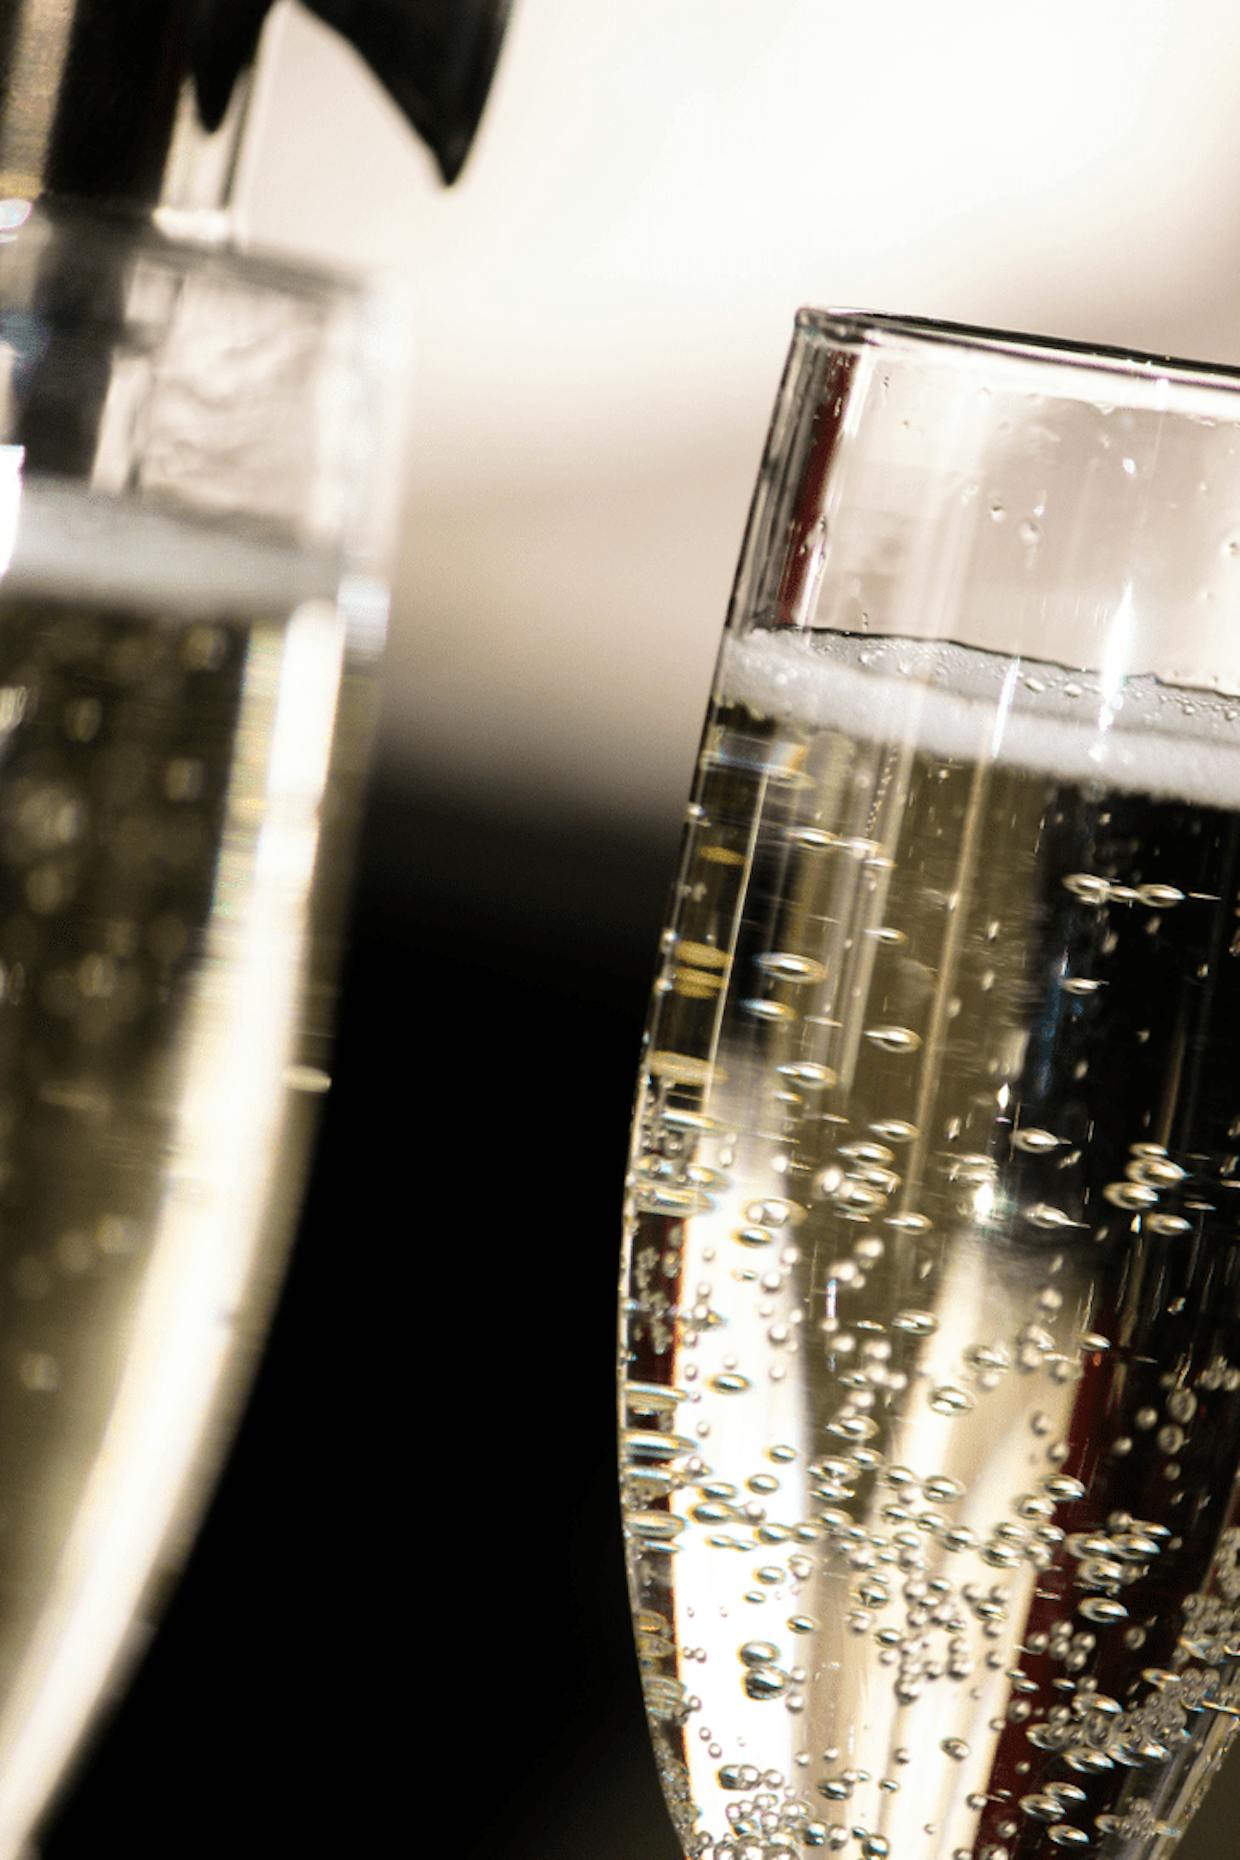 The colloquial name for sparkling wines in Italian is "bollicine" — little bubbles